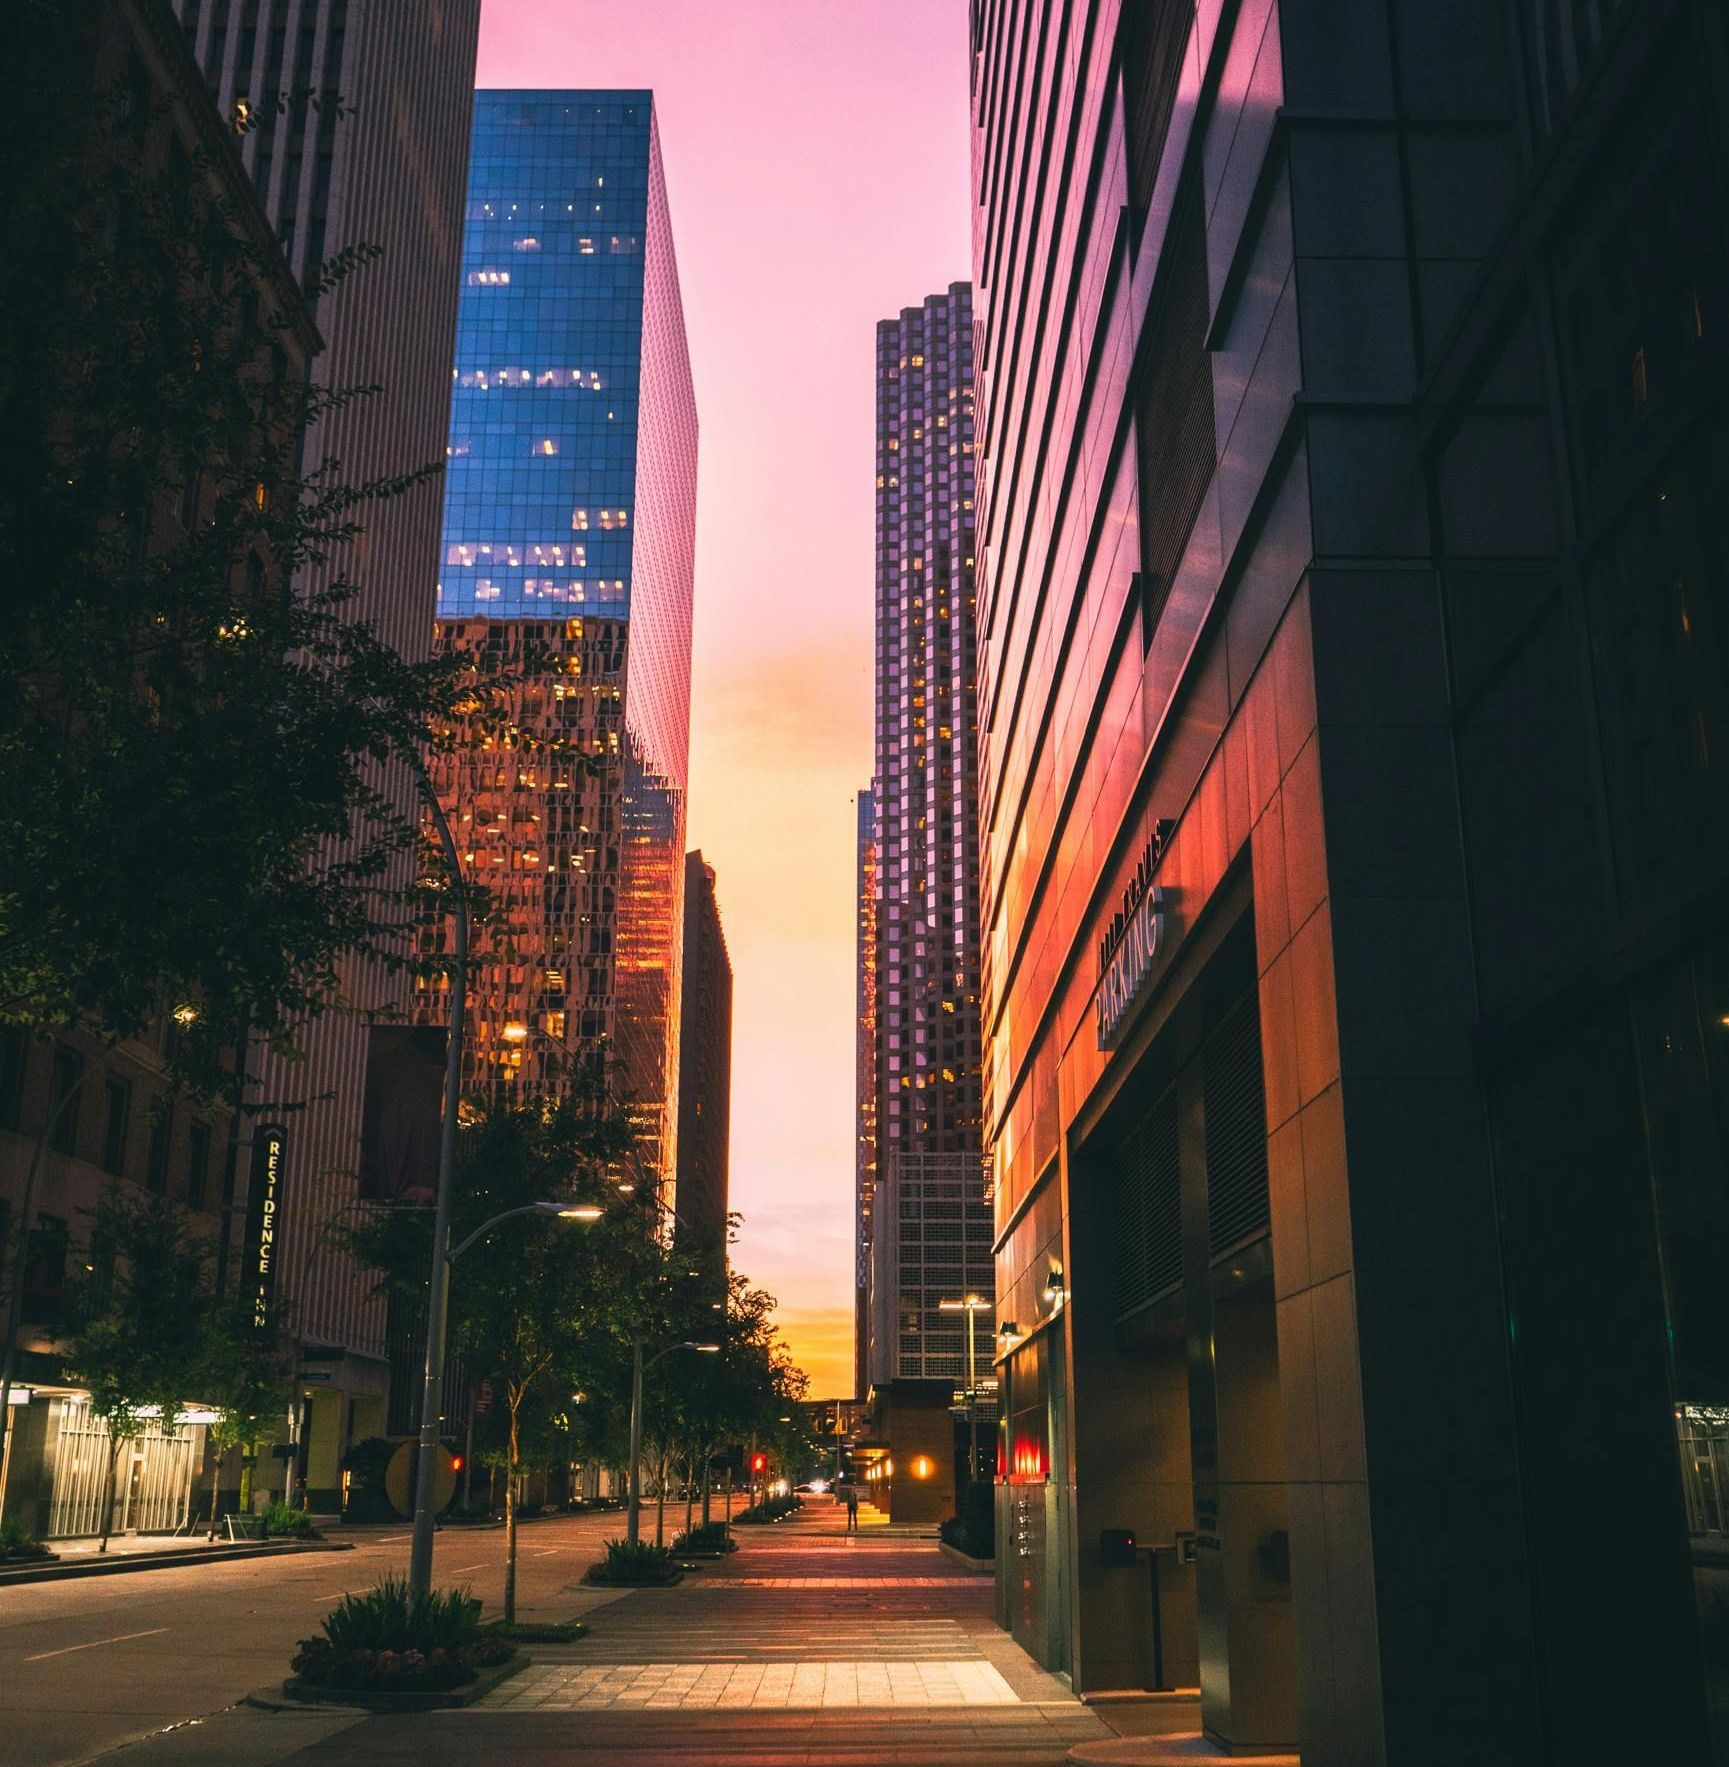 A city street with a sunset in the background